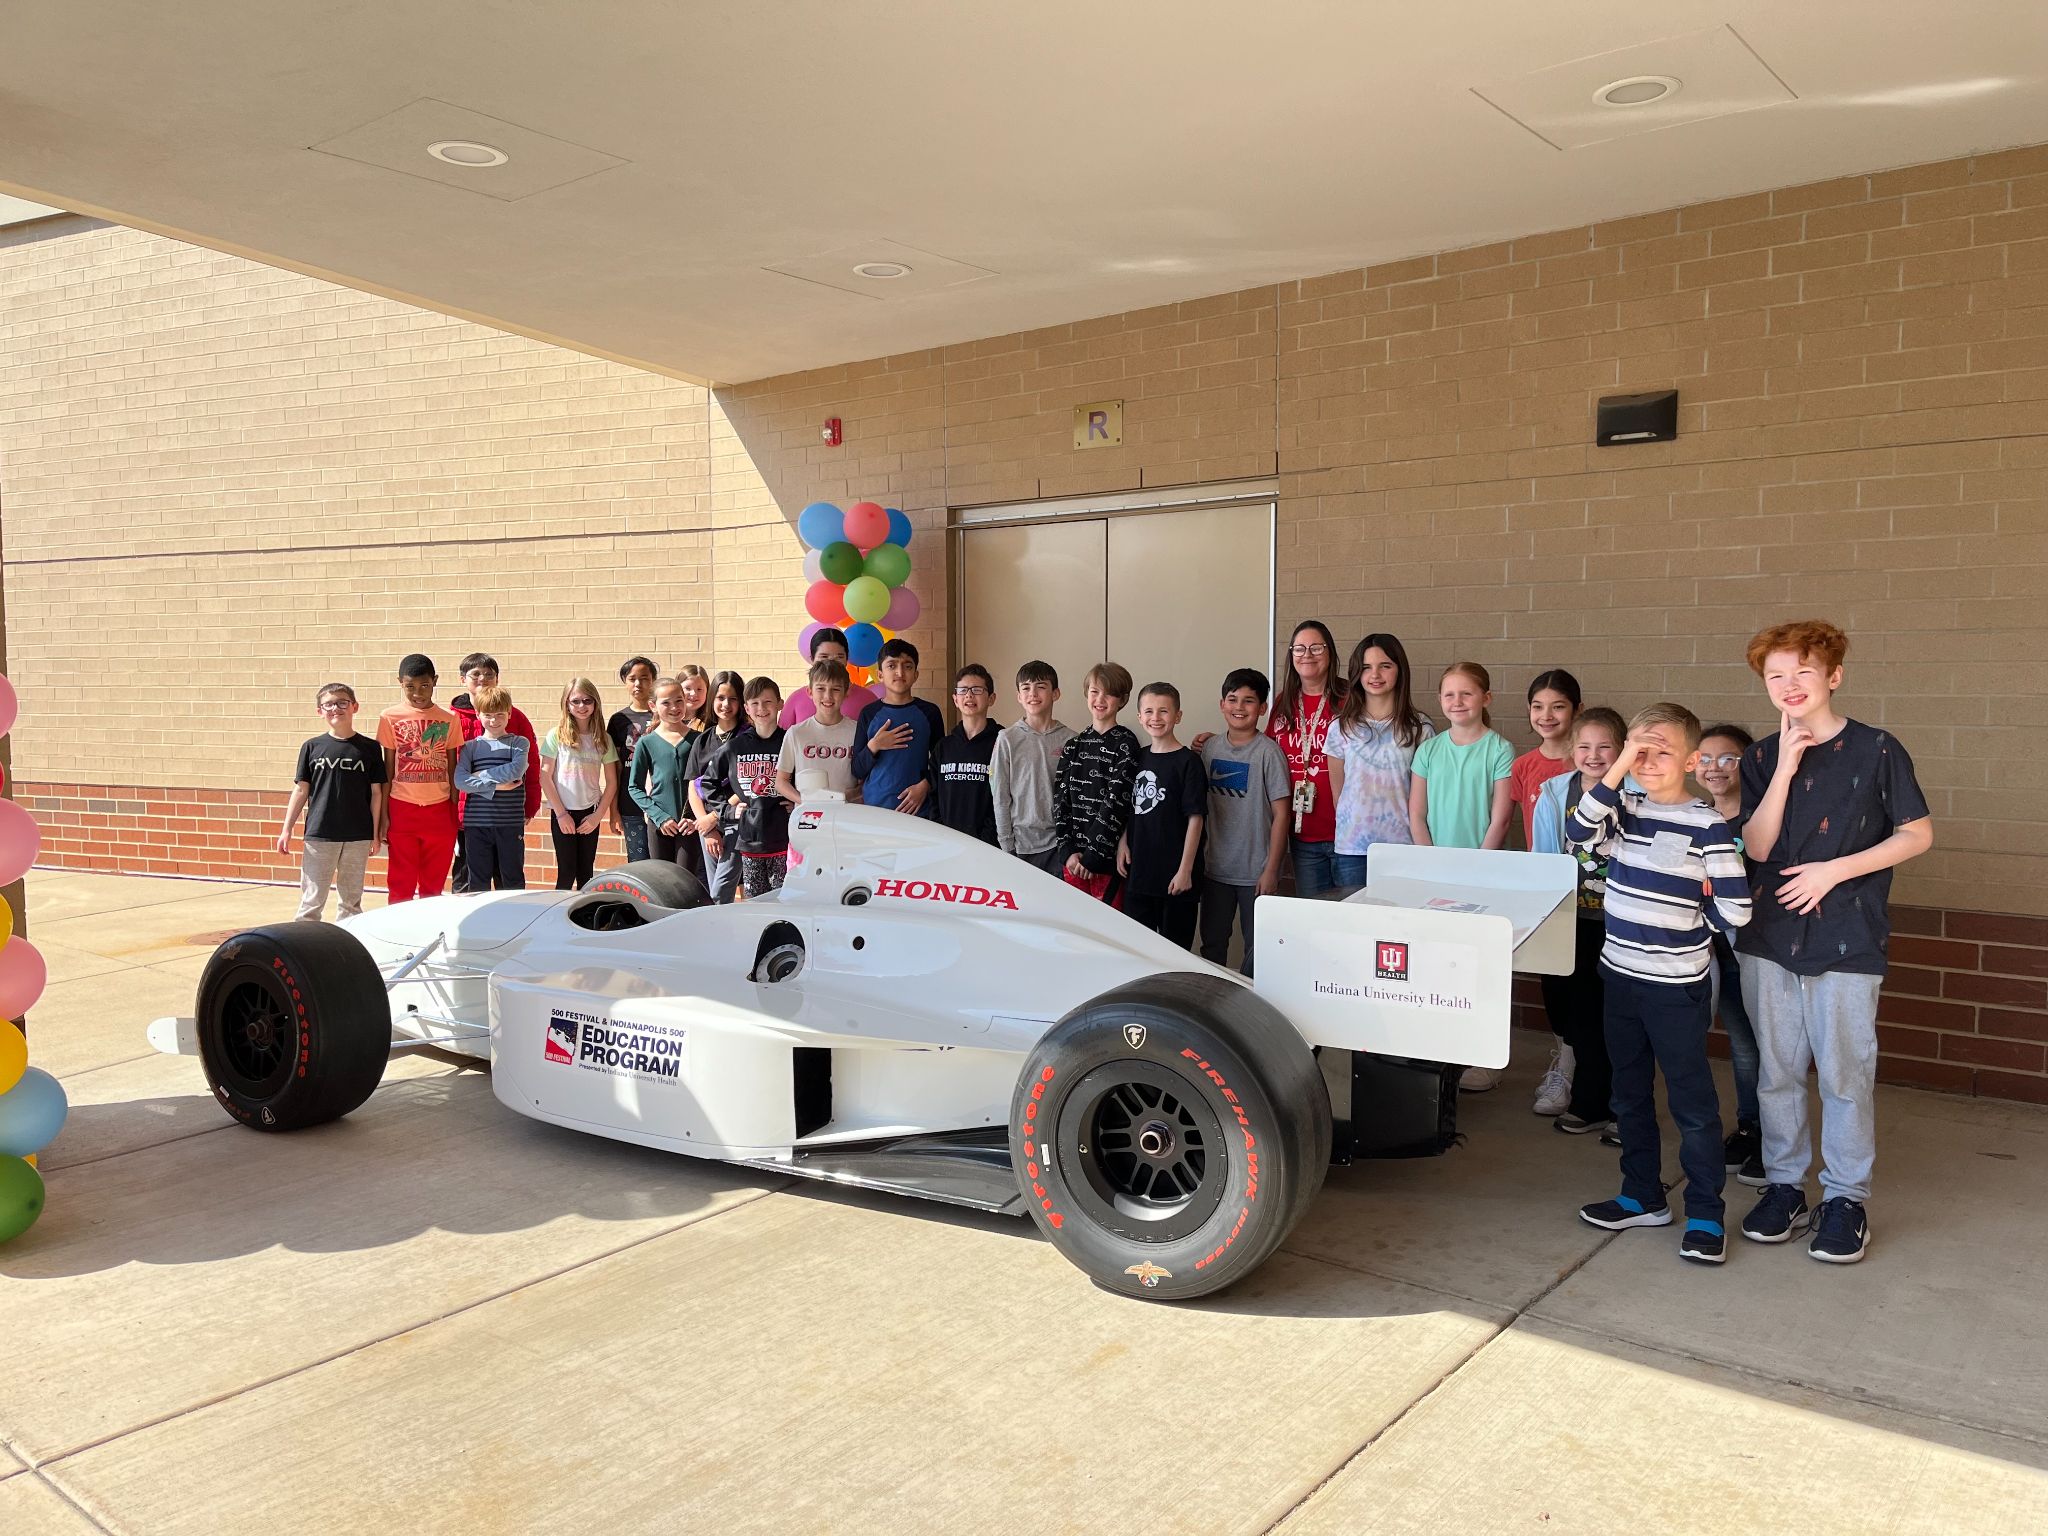 Our fourth graders participated in an INDY 500 Day. The stations revolved around the Indy 500 Race and all the math involved to create the race. The students had a lot of fun and learned so many interesting facts and aspects of the race. They even got to see an actual Indy 500 race car!